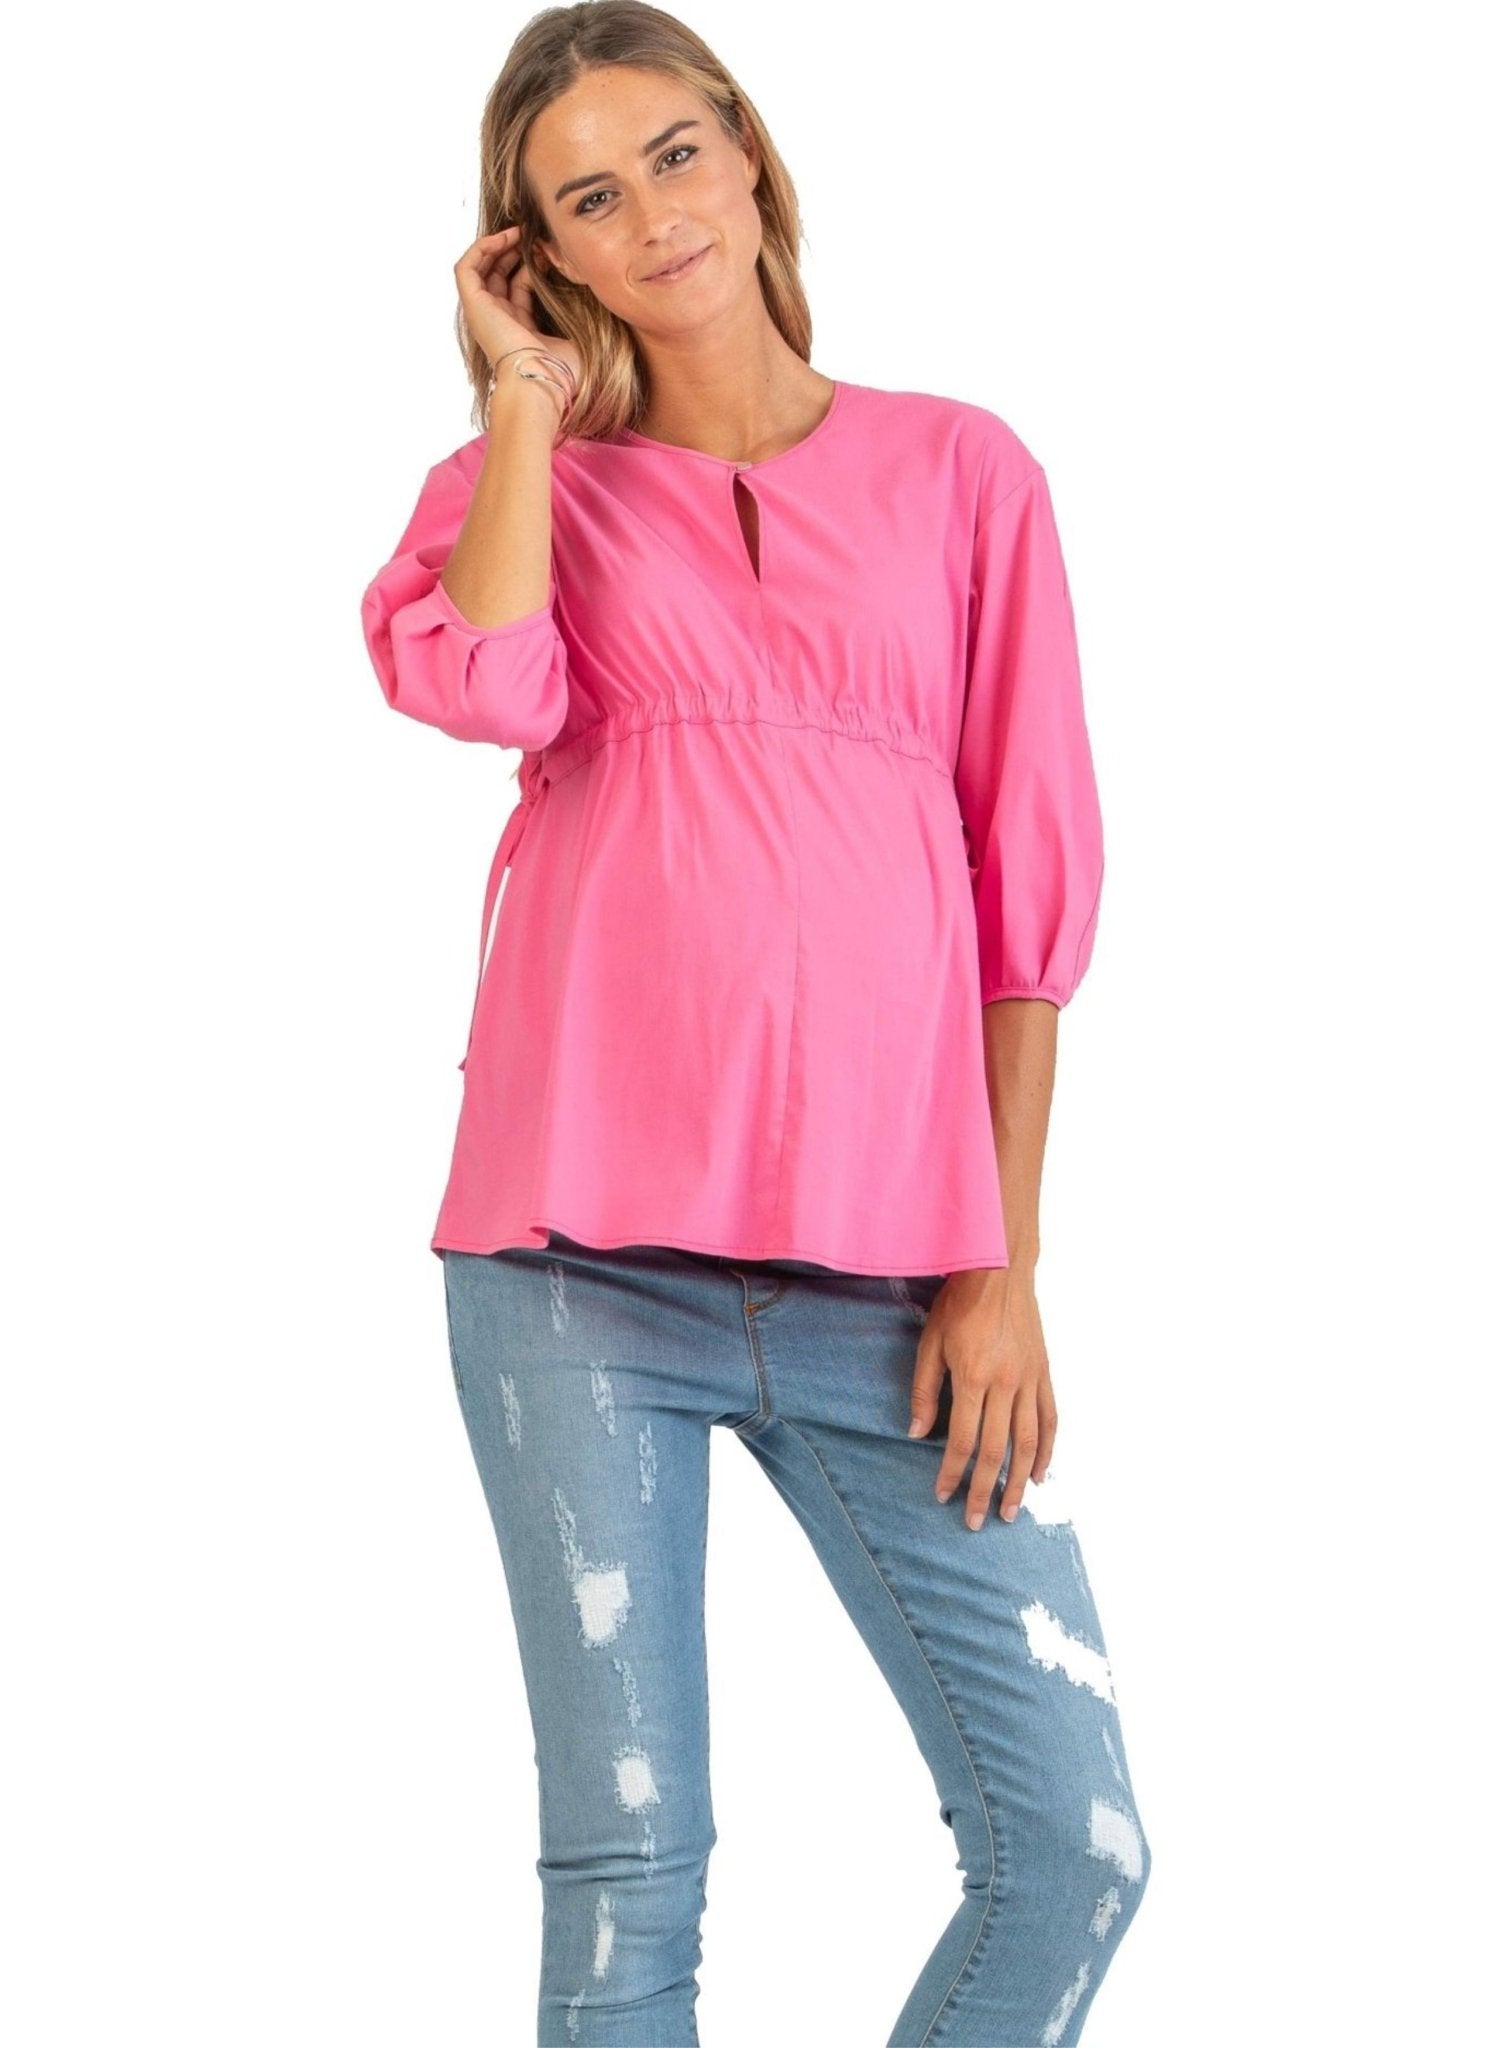 Maternity Blouse with Drawstrings and Balloon Sleeve - Mums and Bumps